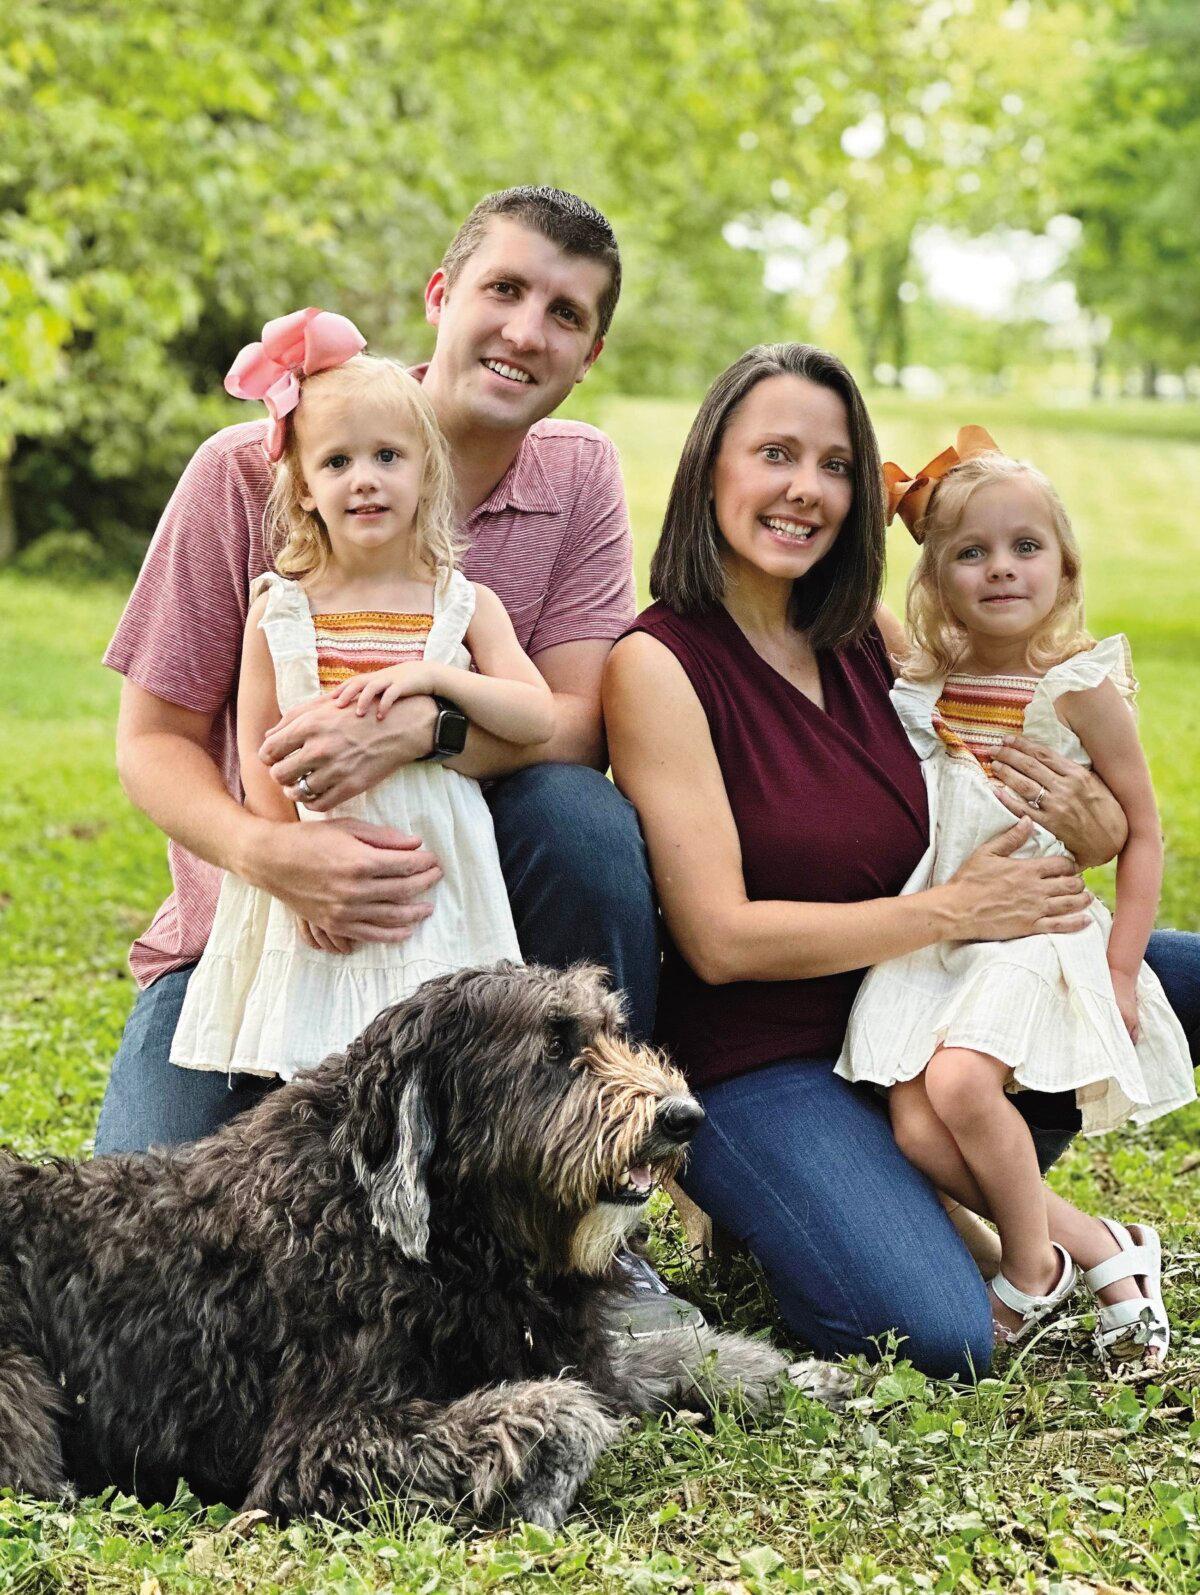 Executive director of the Kentucky branch of Refuge for Women Deanna Lynn with her husband and twin daughters. (Courtesy of Deanna Lynn)